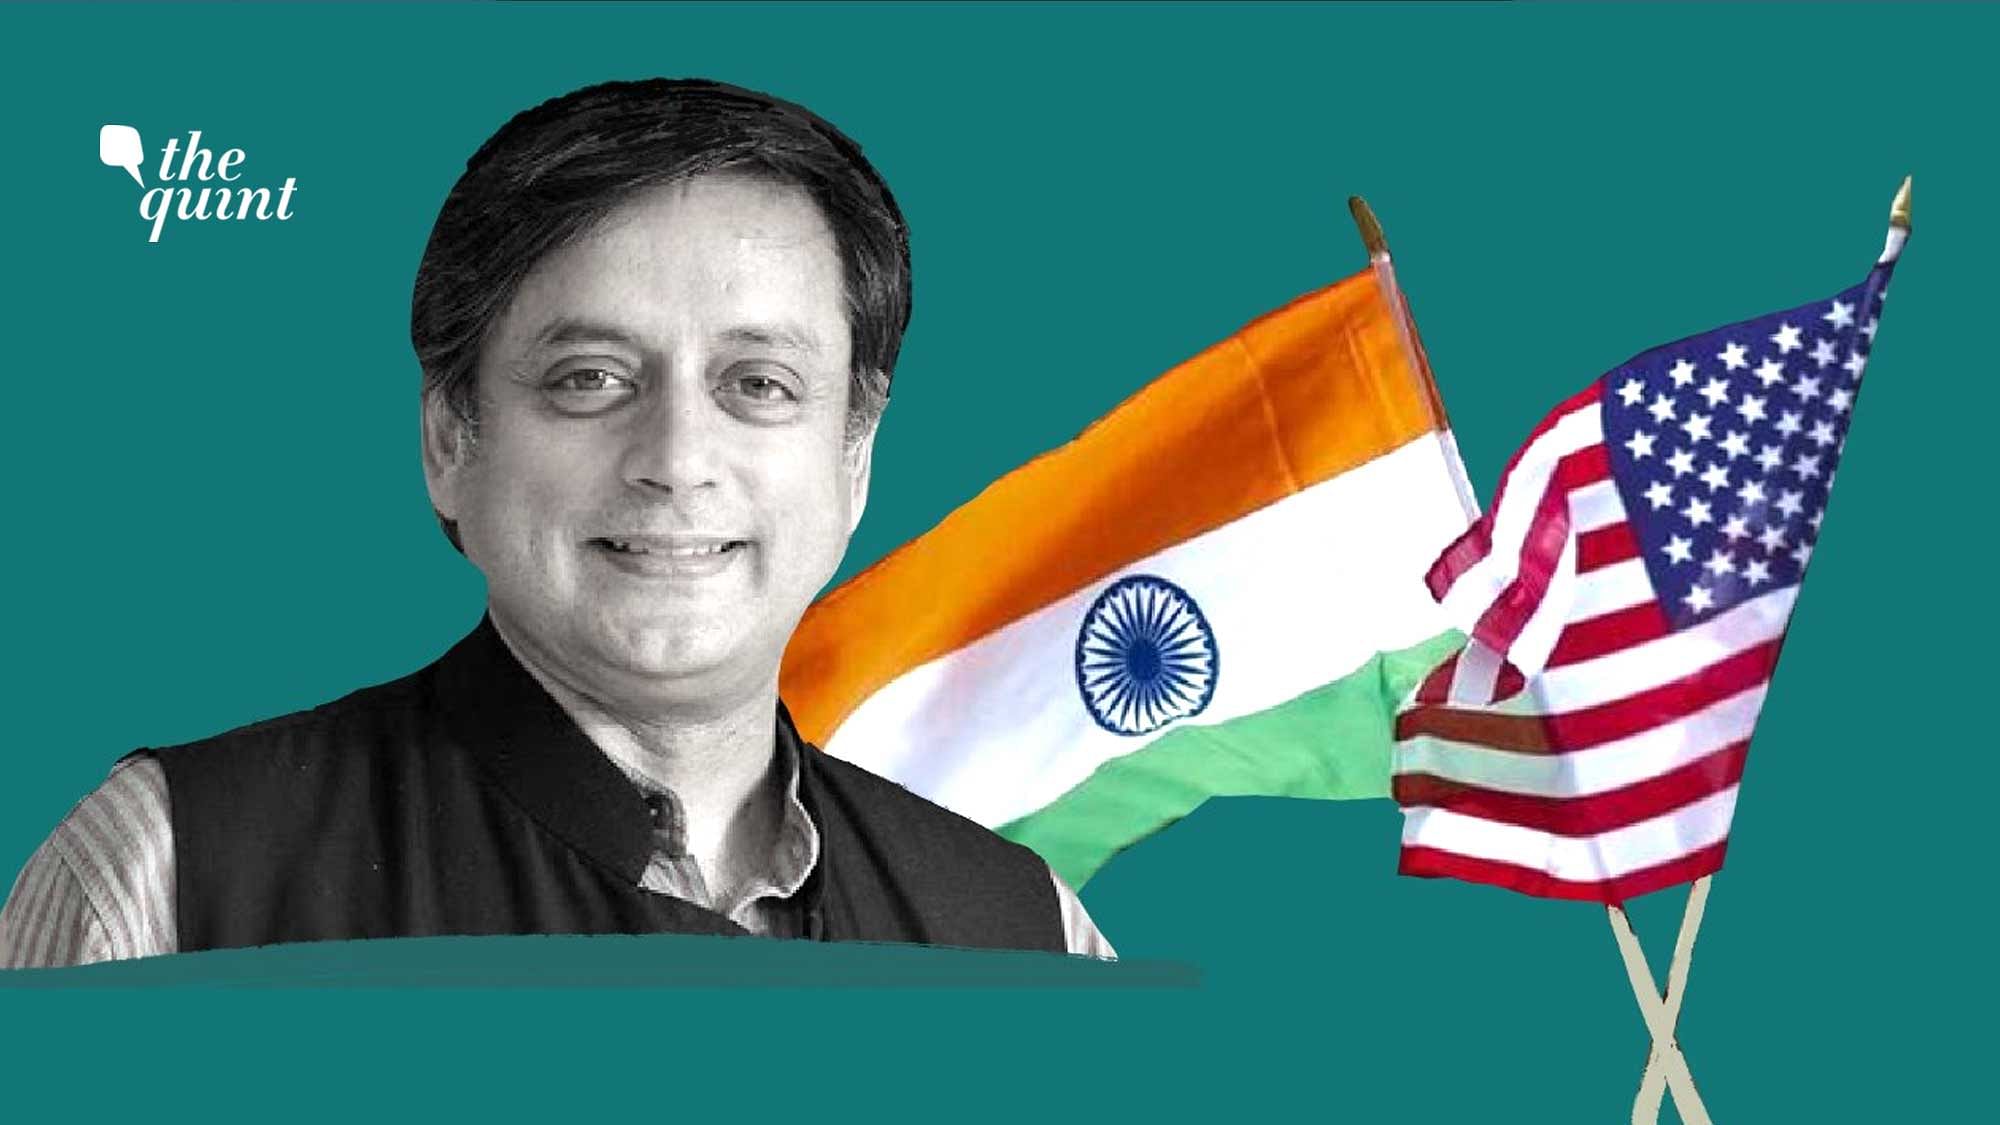 Image of Dr Shashi Tharoor and the Indian and American flags used for representational purposes.